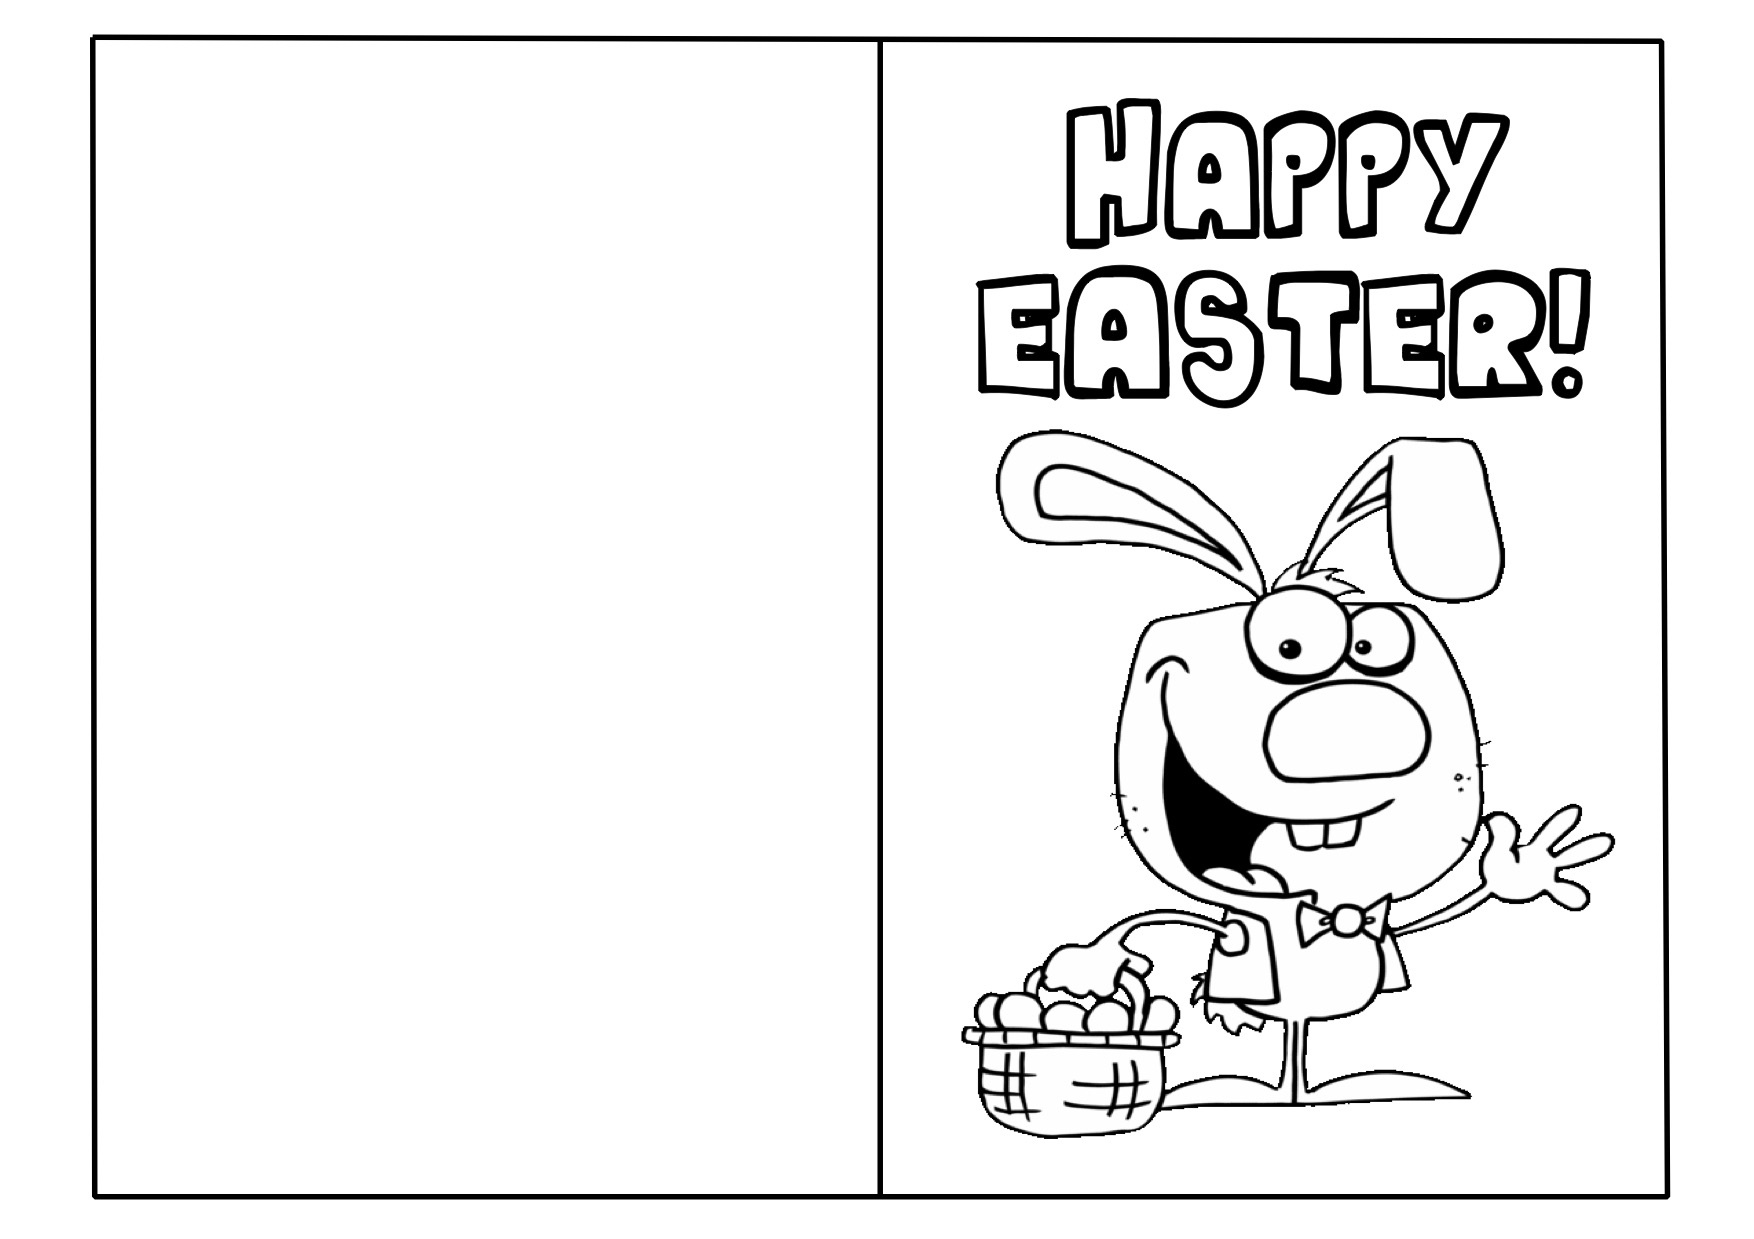 Printable Funny Easter Cards Free